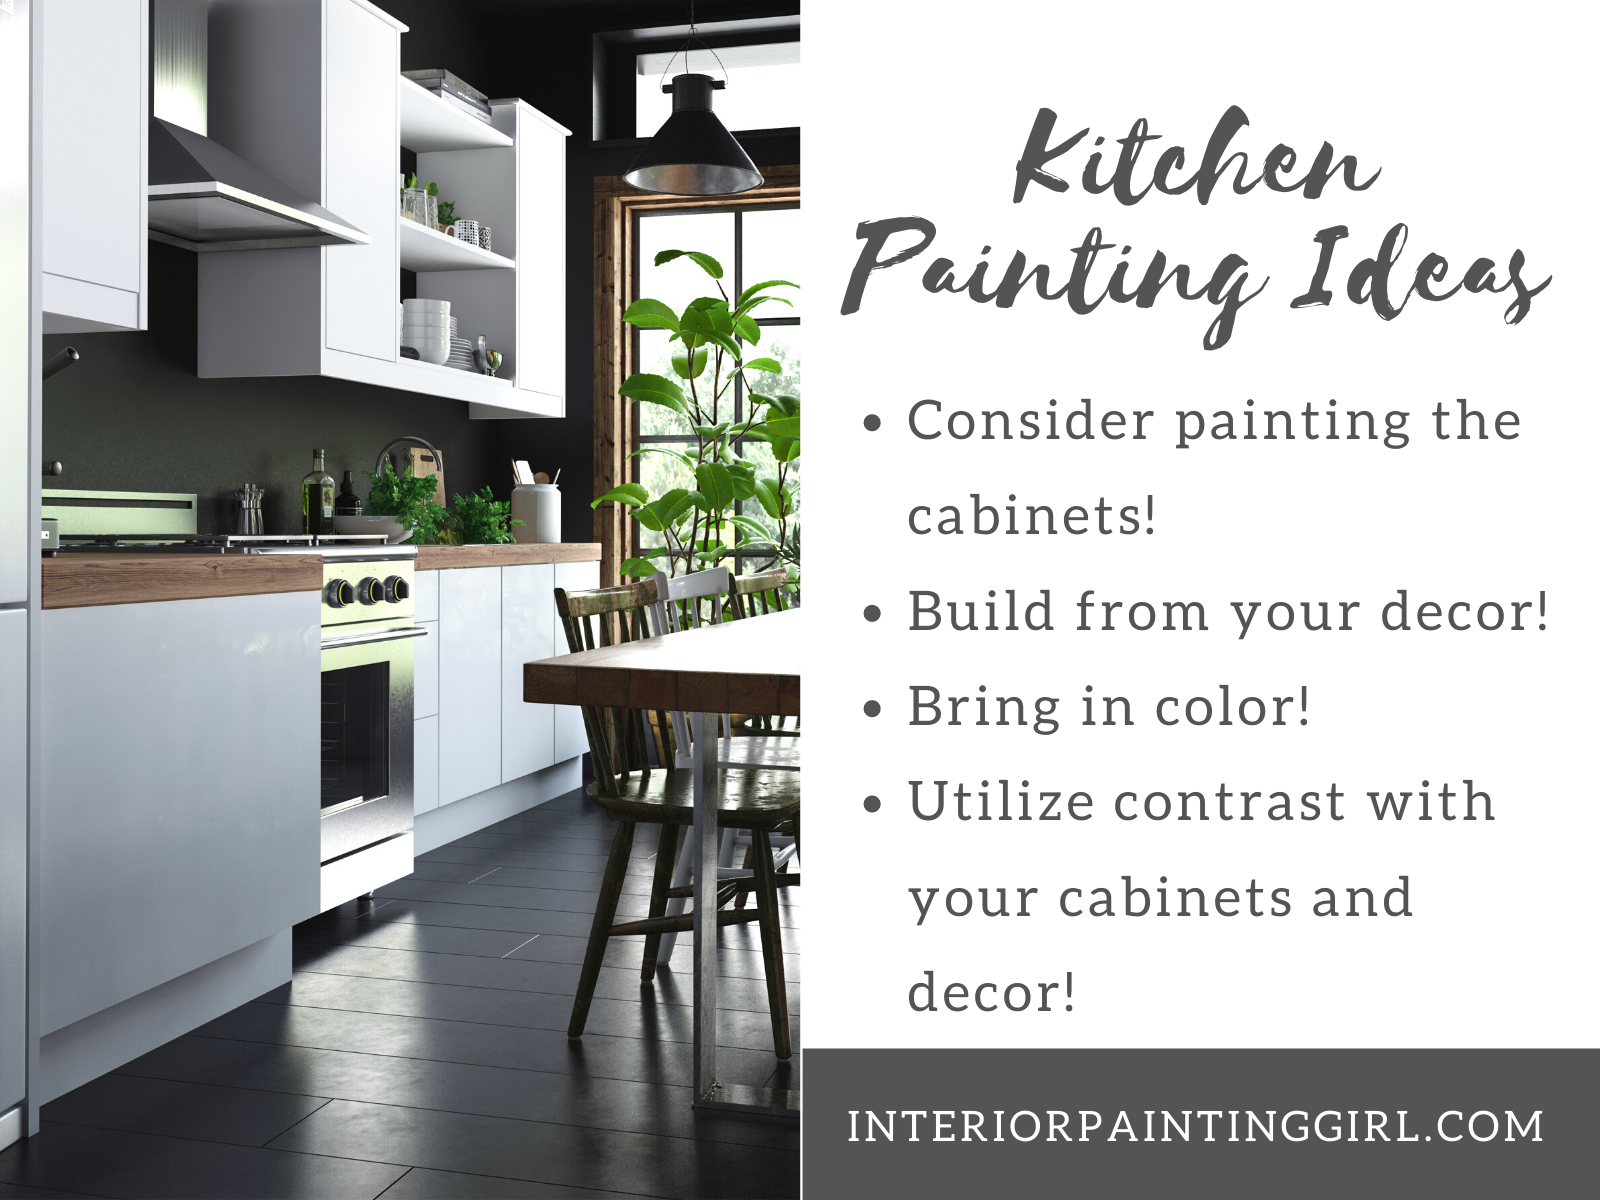 Kitchen Painting Ideas from That Interior Painting Girl